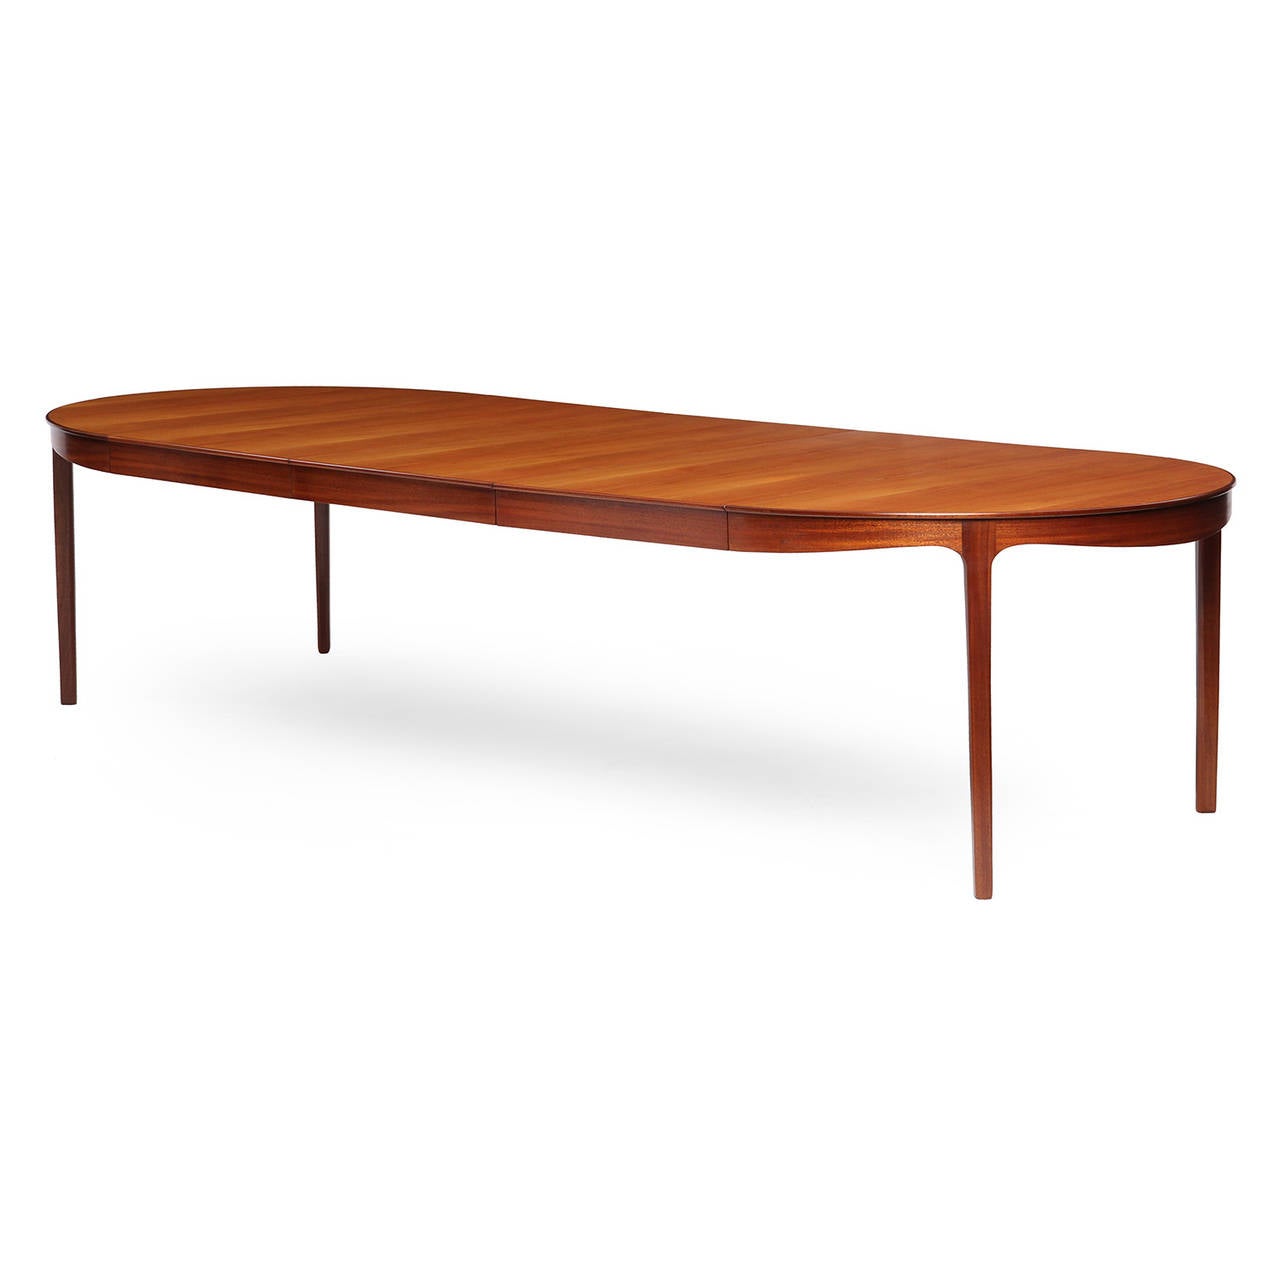 Mid-20th Century Mahogany Dining Table by Ole Wanscher